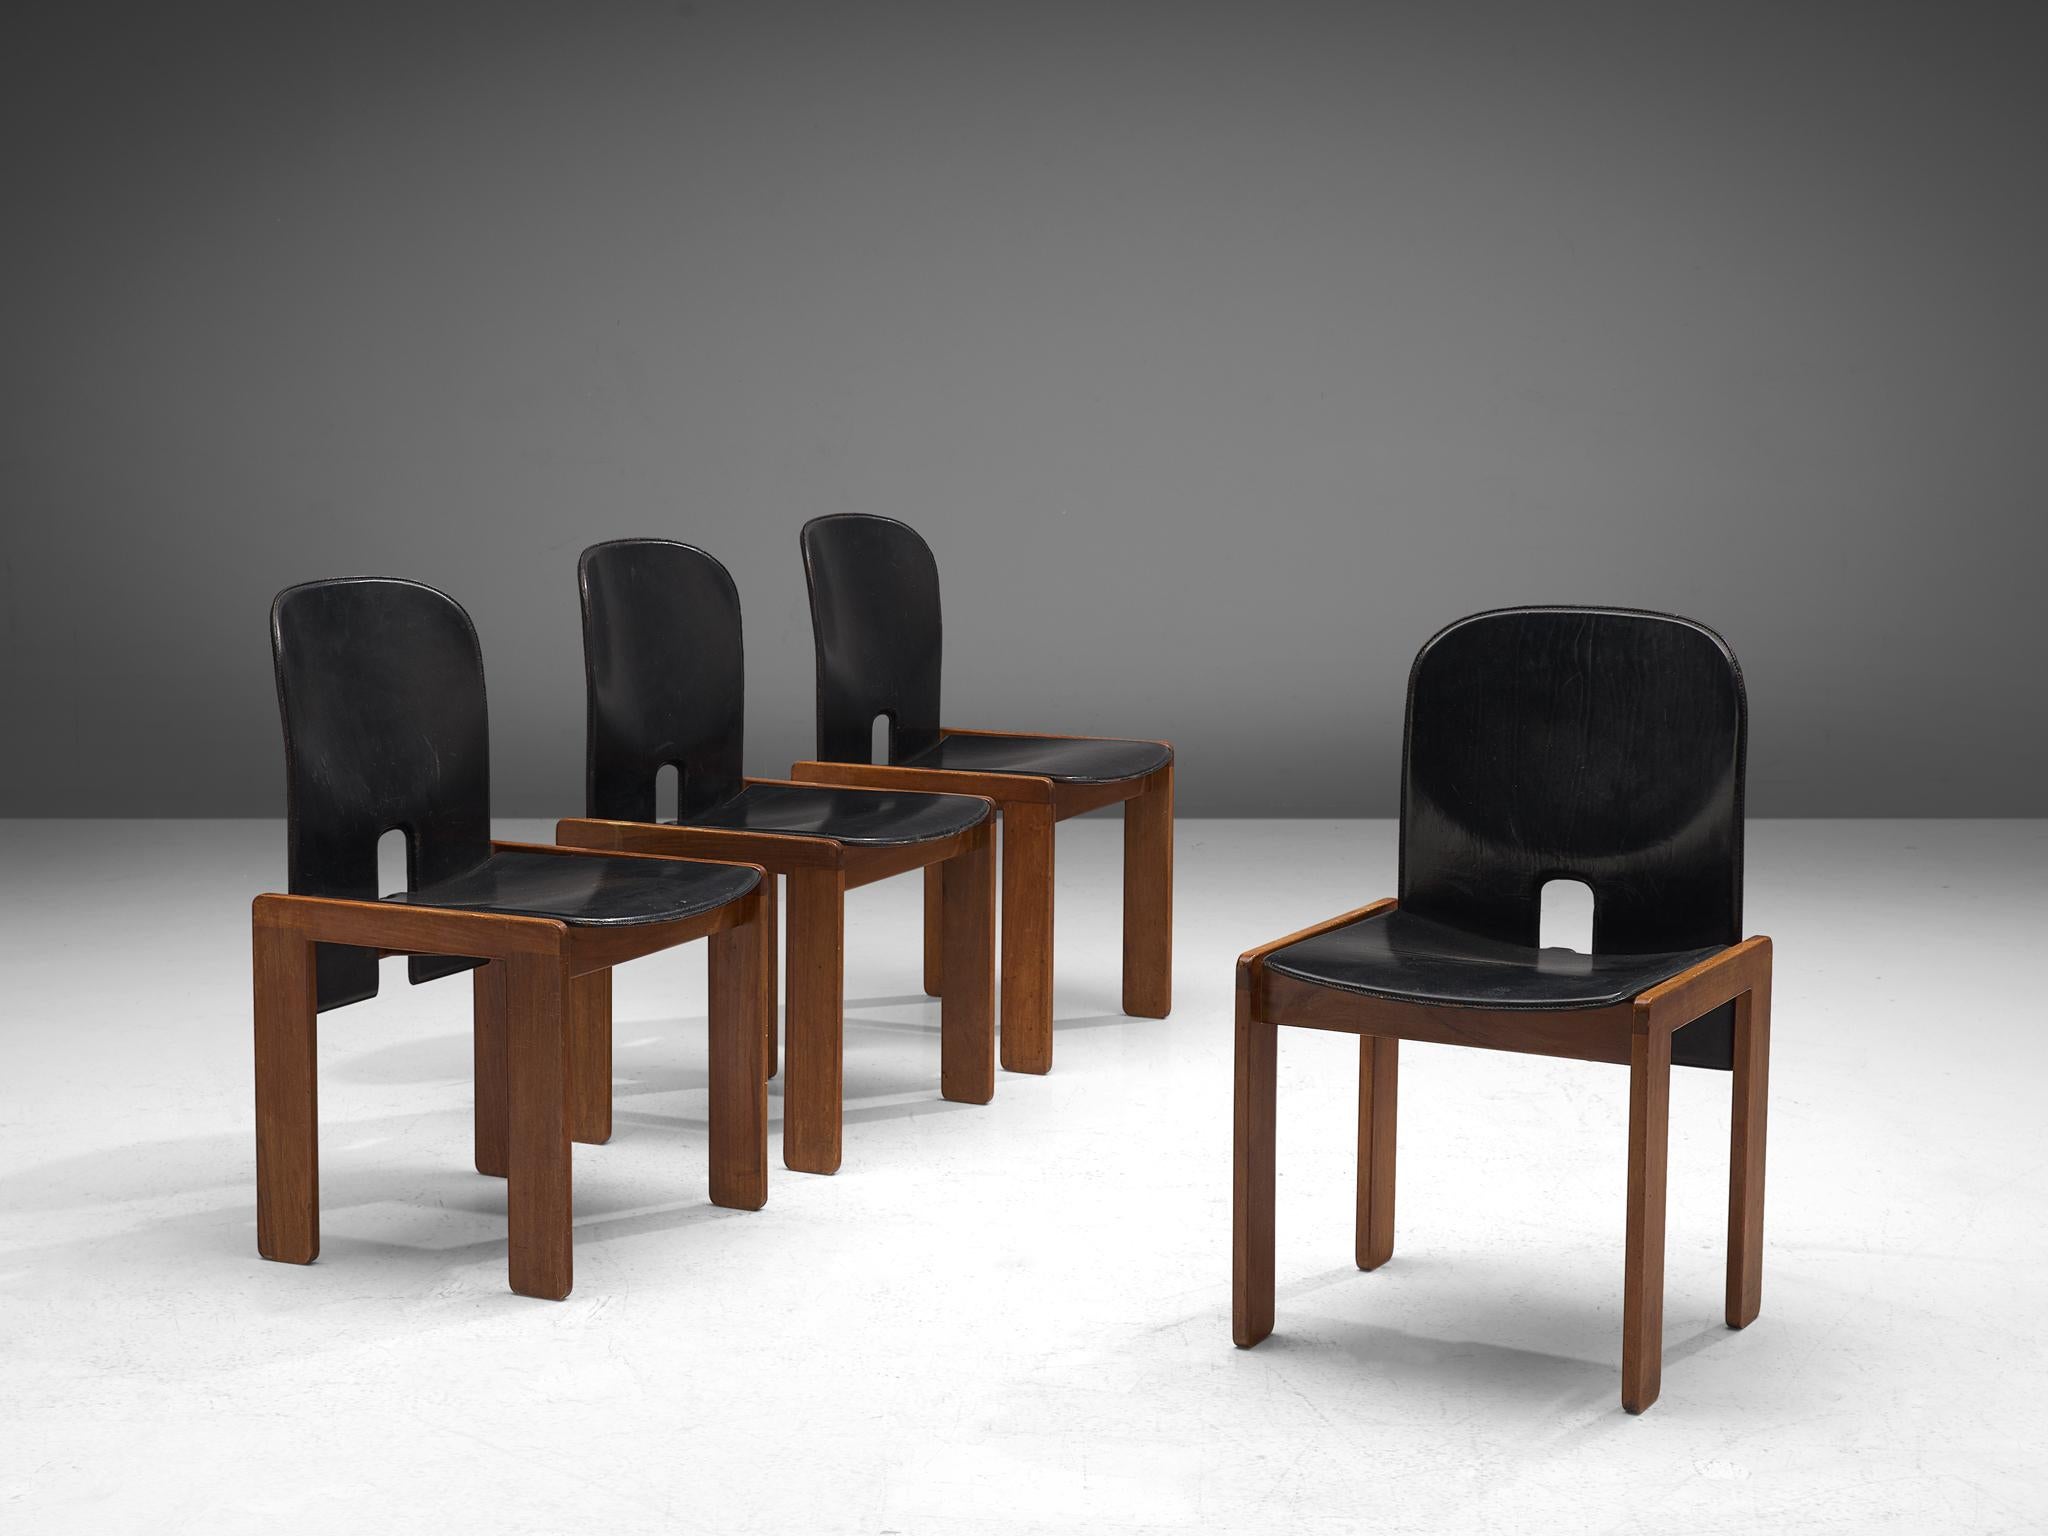 Afra & Tobia Scarpa for Cassina, set of four chairs model 121, leather and walnut, Italy, 1965.

Set of four chairs by Italian designer couple Tobia and Afra Scarpa. These chairs have a cubic and architectural appearance. The base consist of four